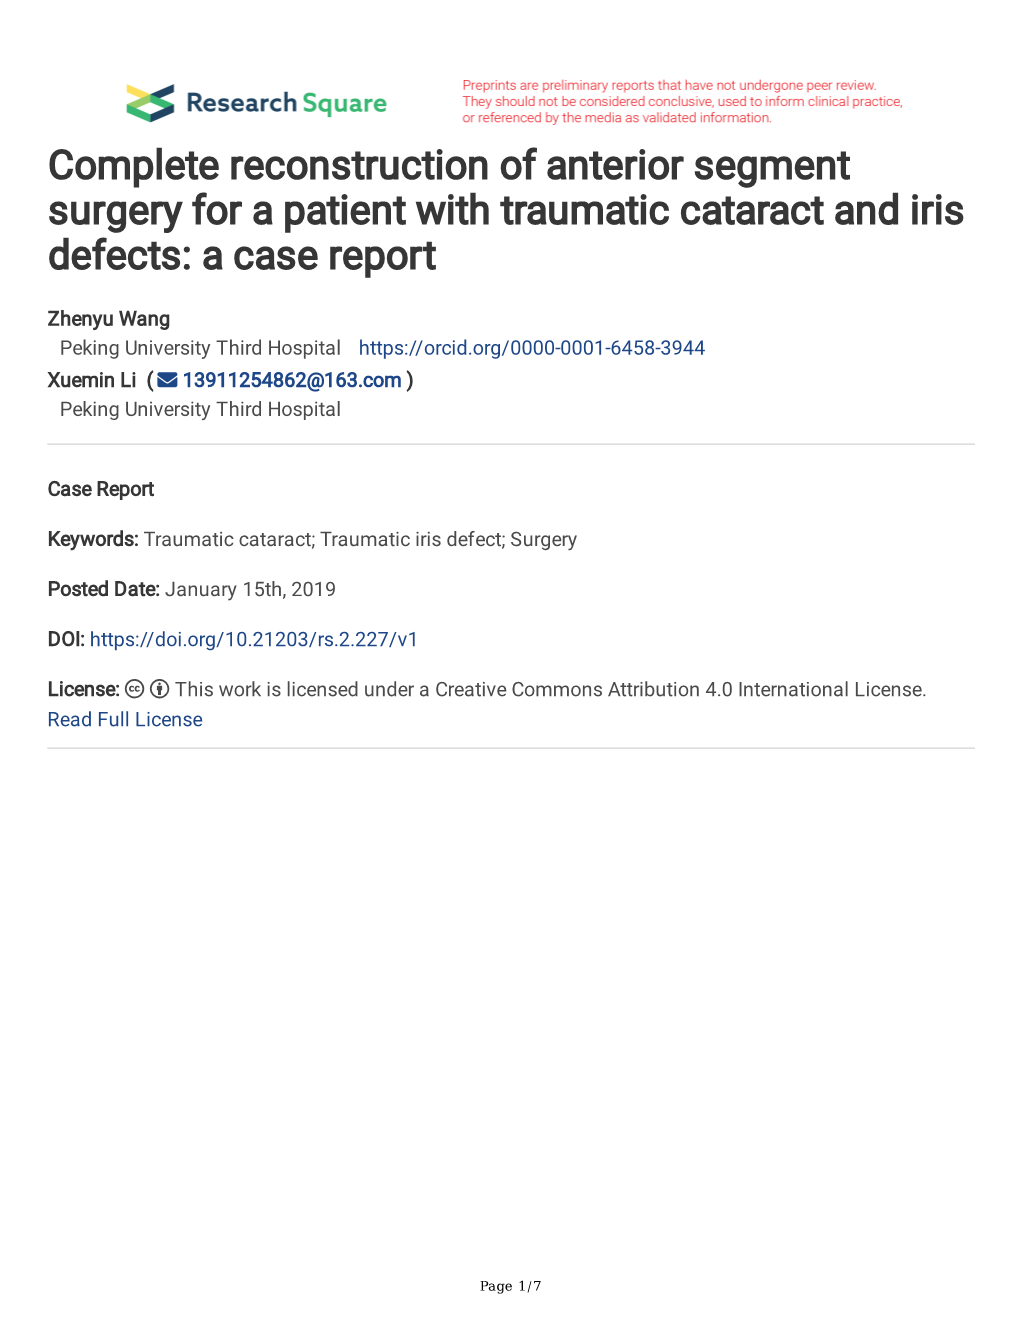 Complete Reconstruction of Anterior Segment Surgery for a Patient with Traumatic Cataract and Iris Defects: a Case Report